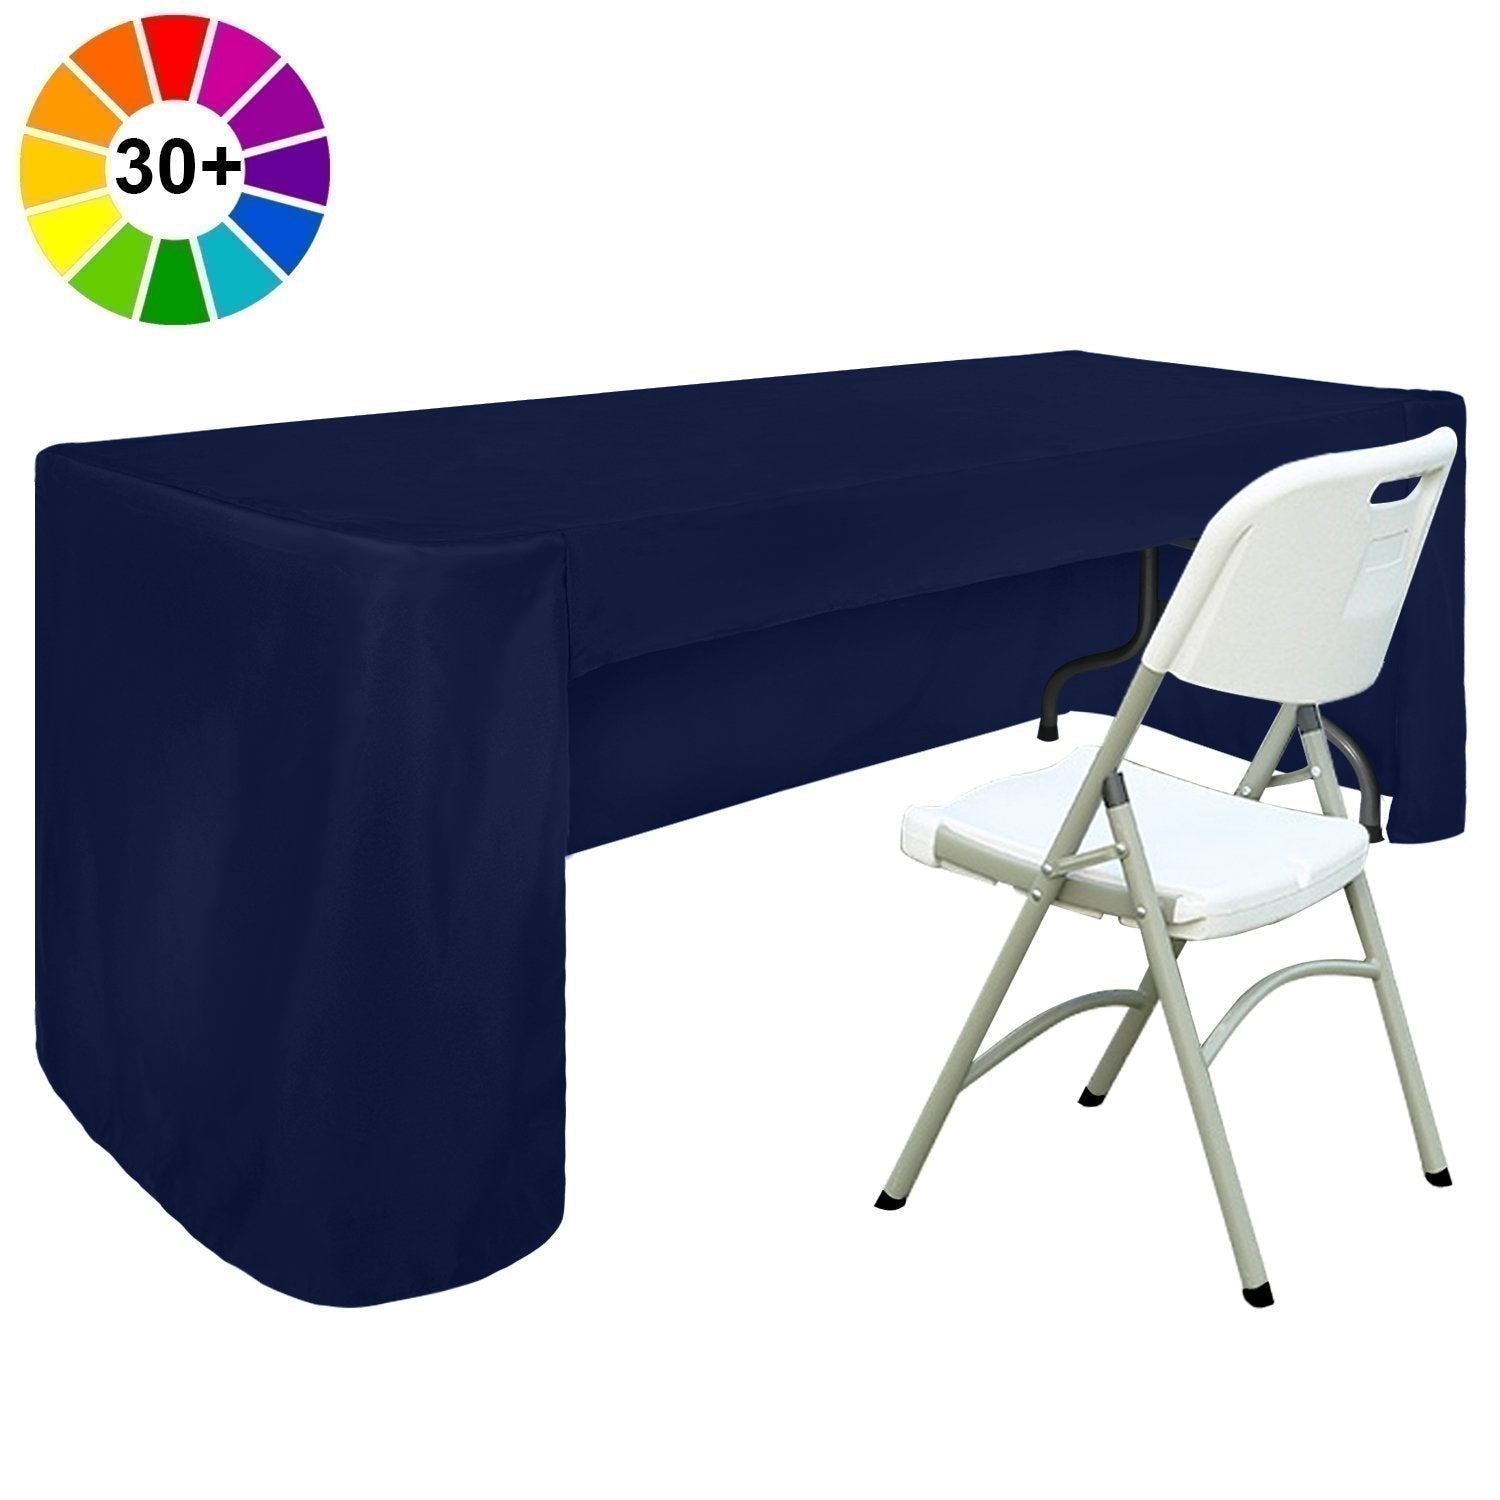 6 FT Rectangle Dinner Tablecloth Table Cover for Rectangular Table - ABC-CANOPY